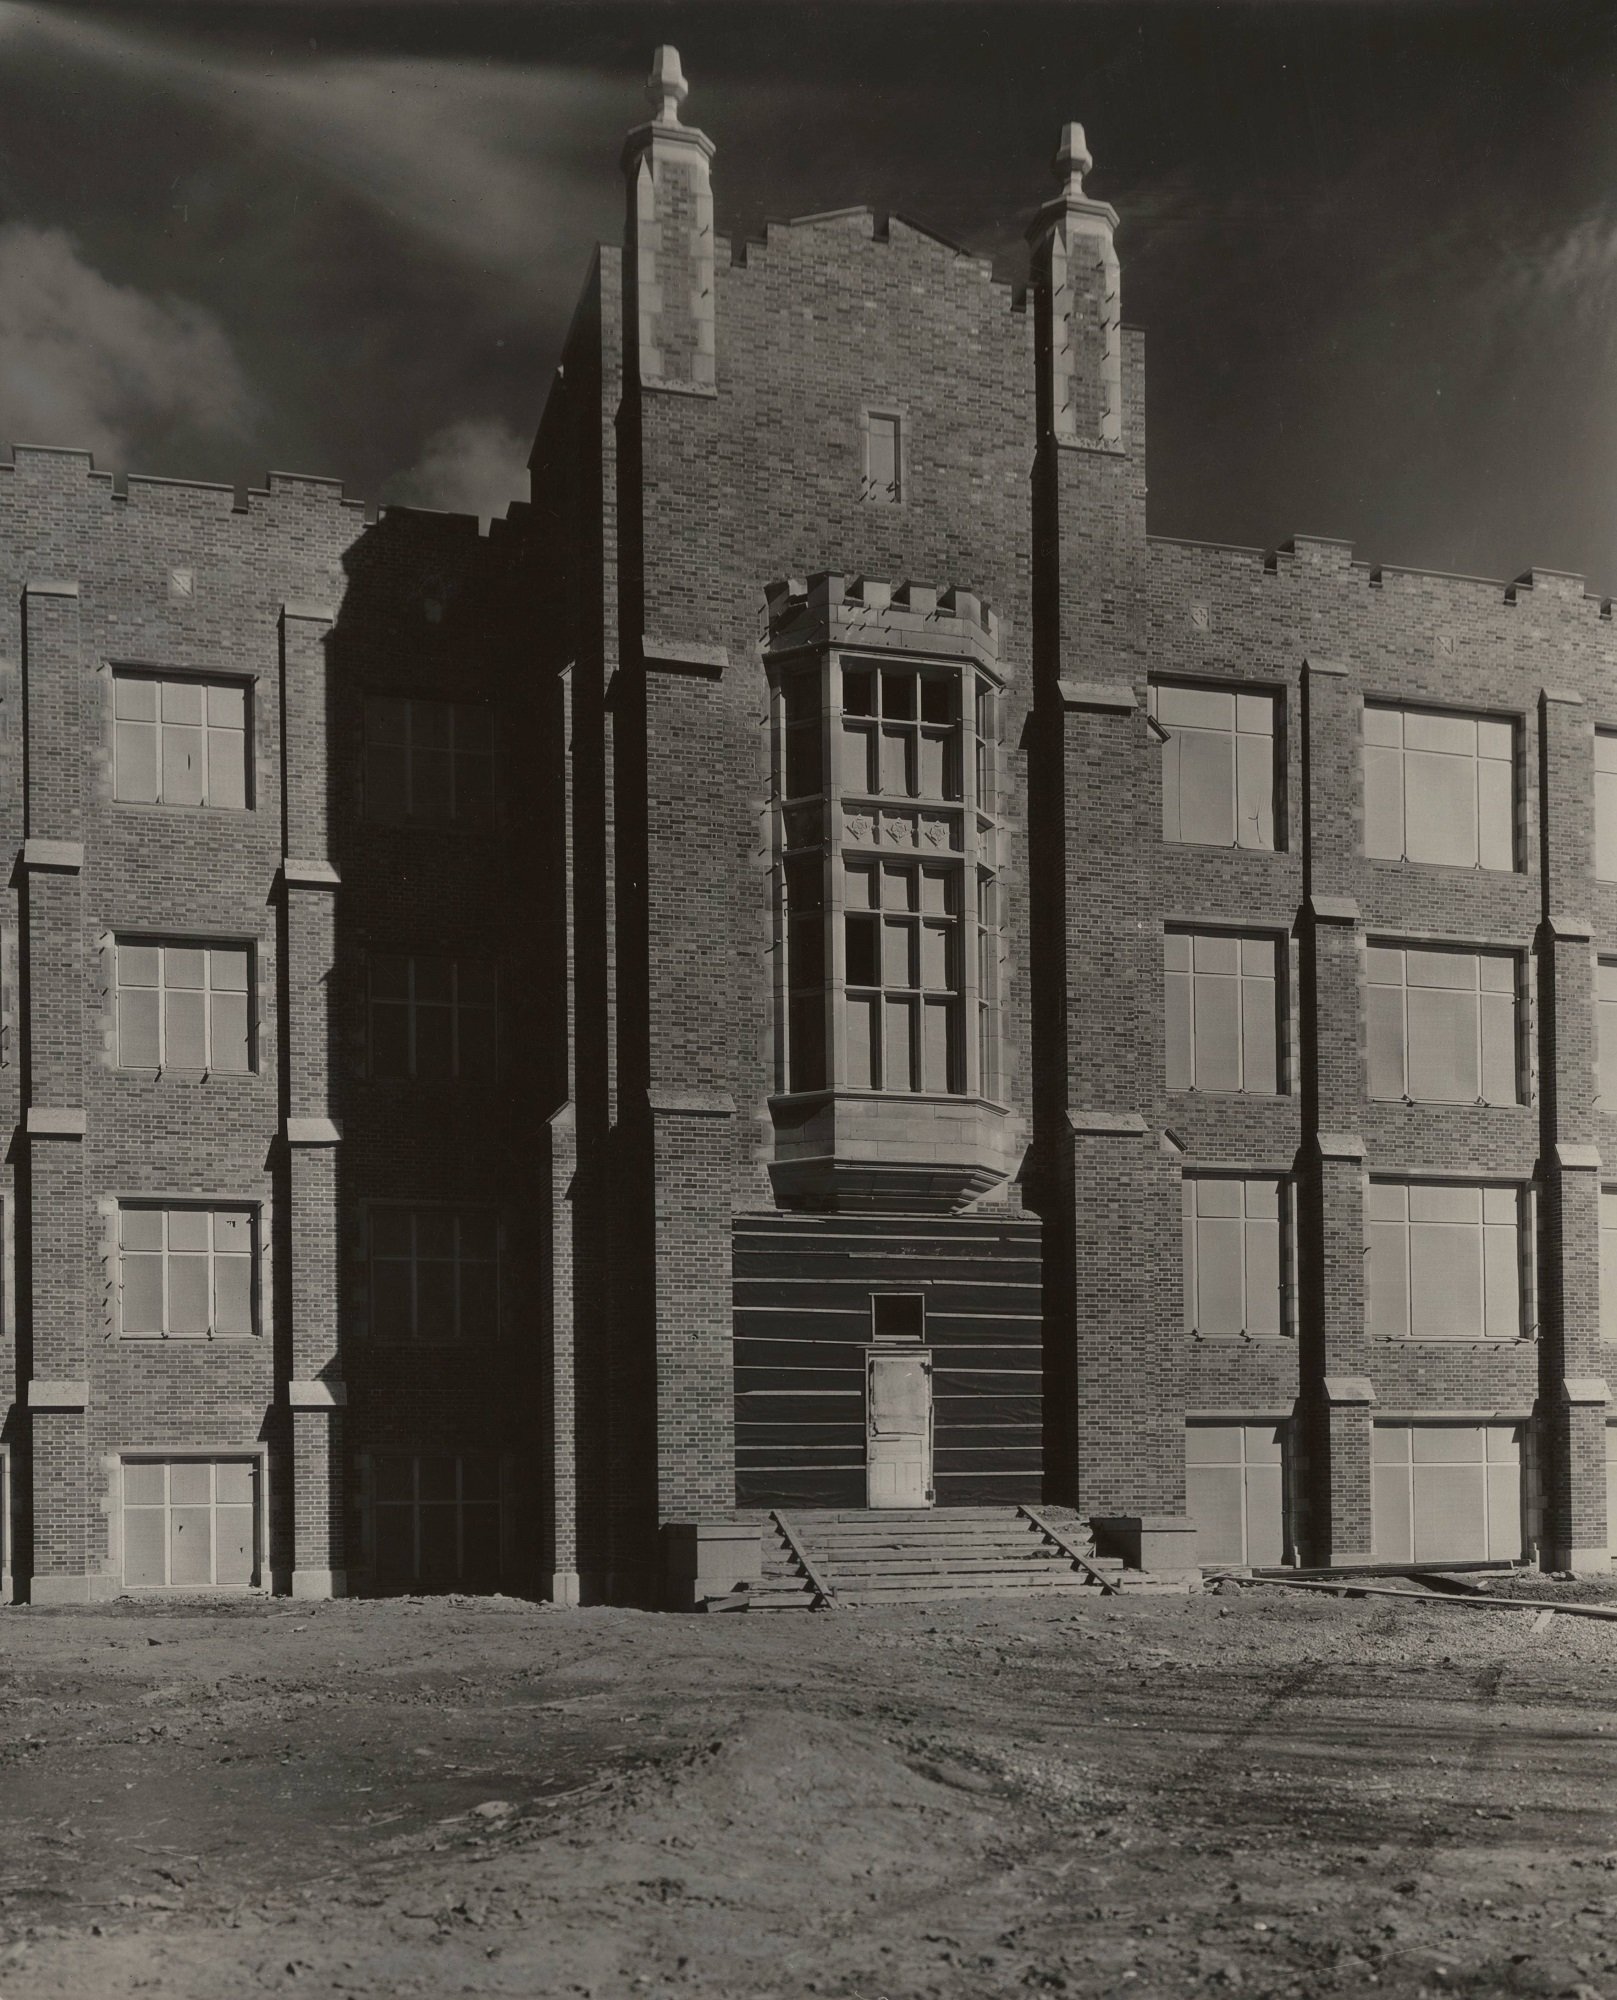 Merrifield Hall with boarded up windows and doors prior to finishing construction.